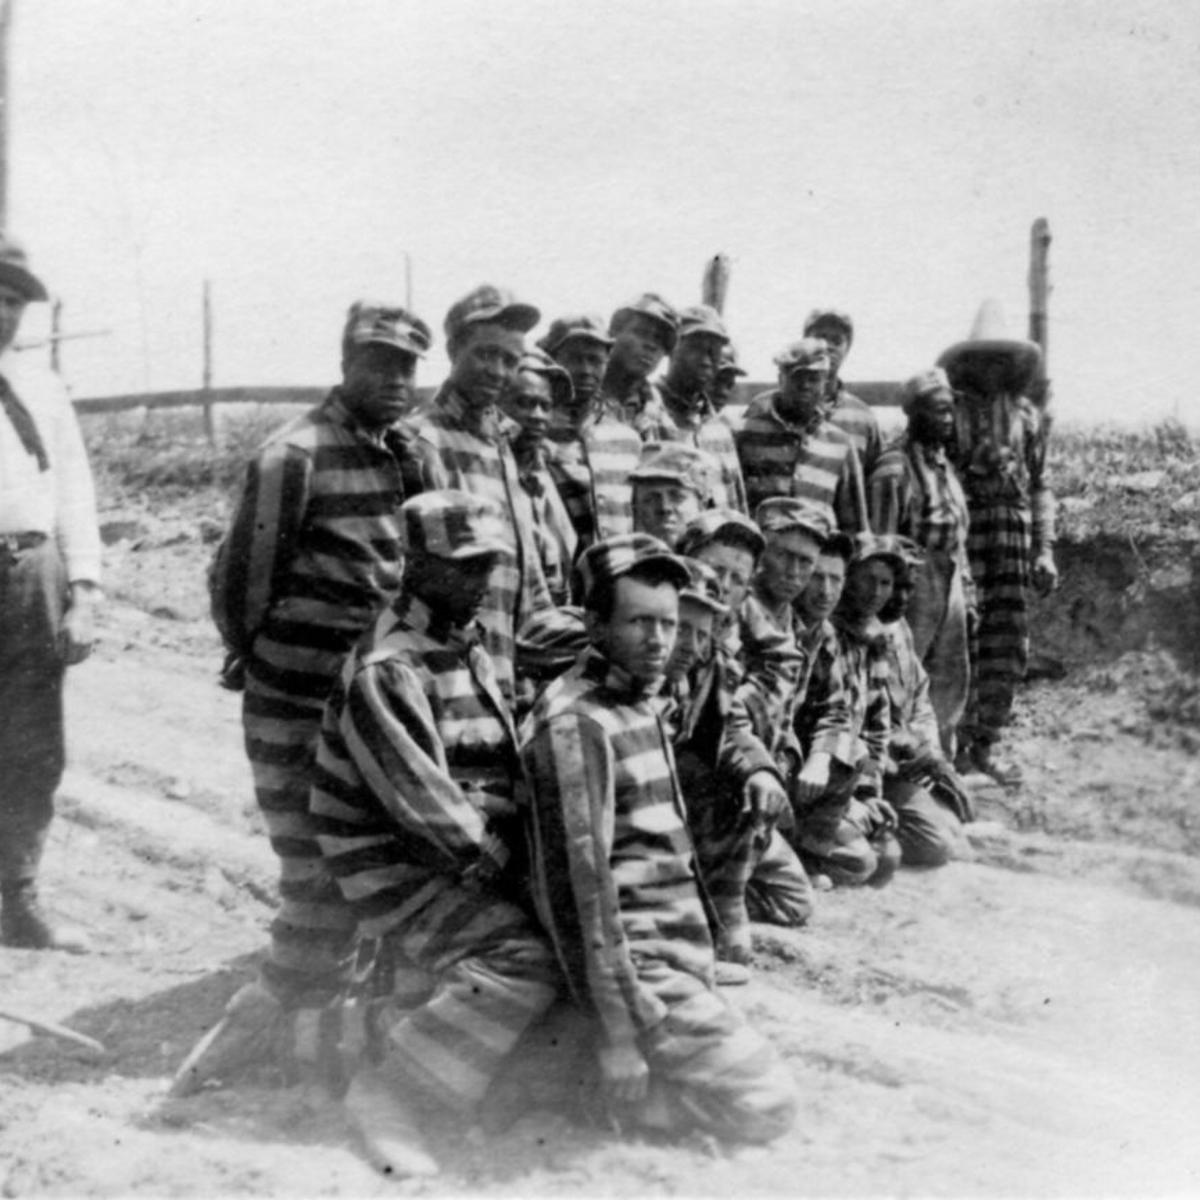 A photo of inmates working in a chain gang in the 1930s.